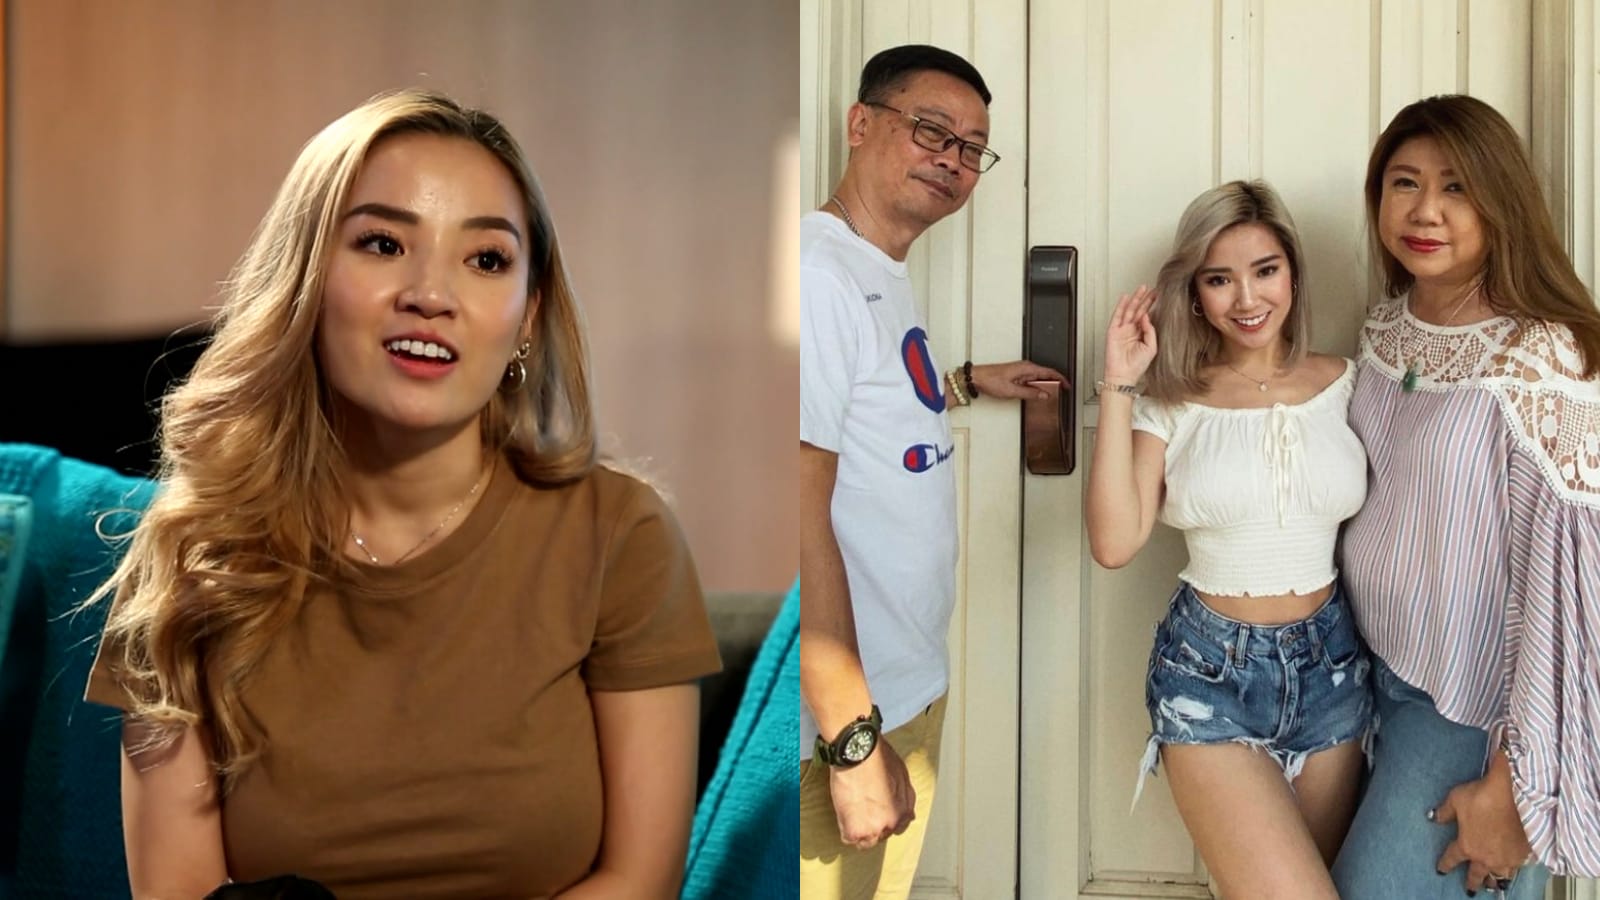 Naomi Neo’s Parents Wanted To Take Her To The Hospital For A “Check-Up” When They Suspected She Was Having Sex In Secondary School